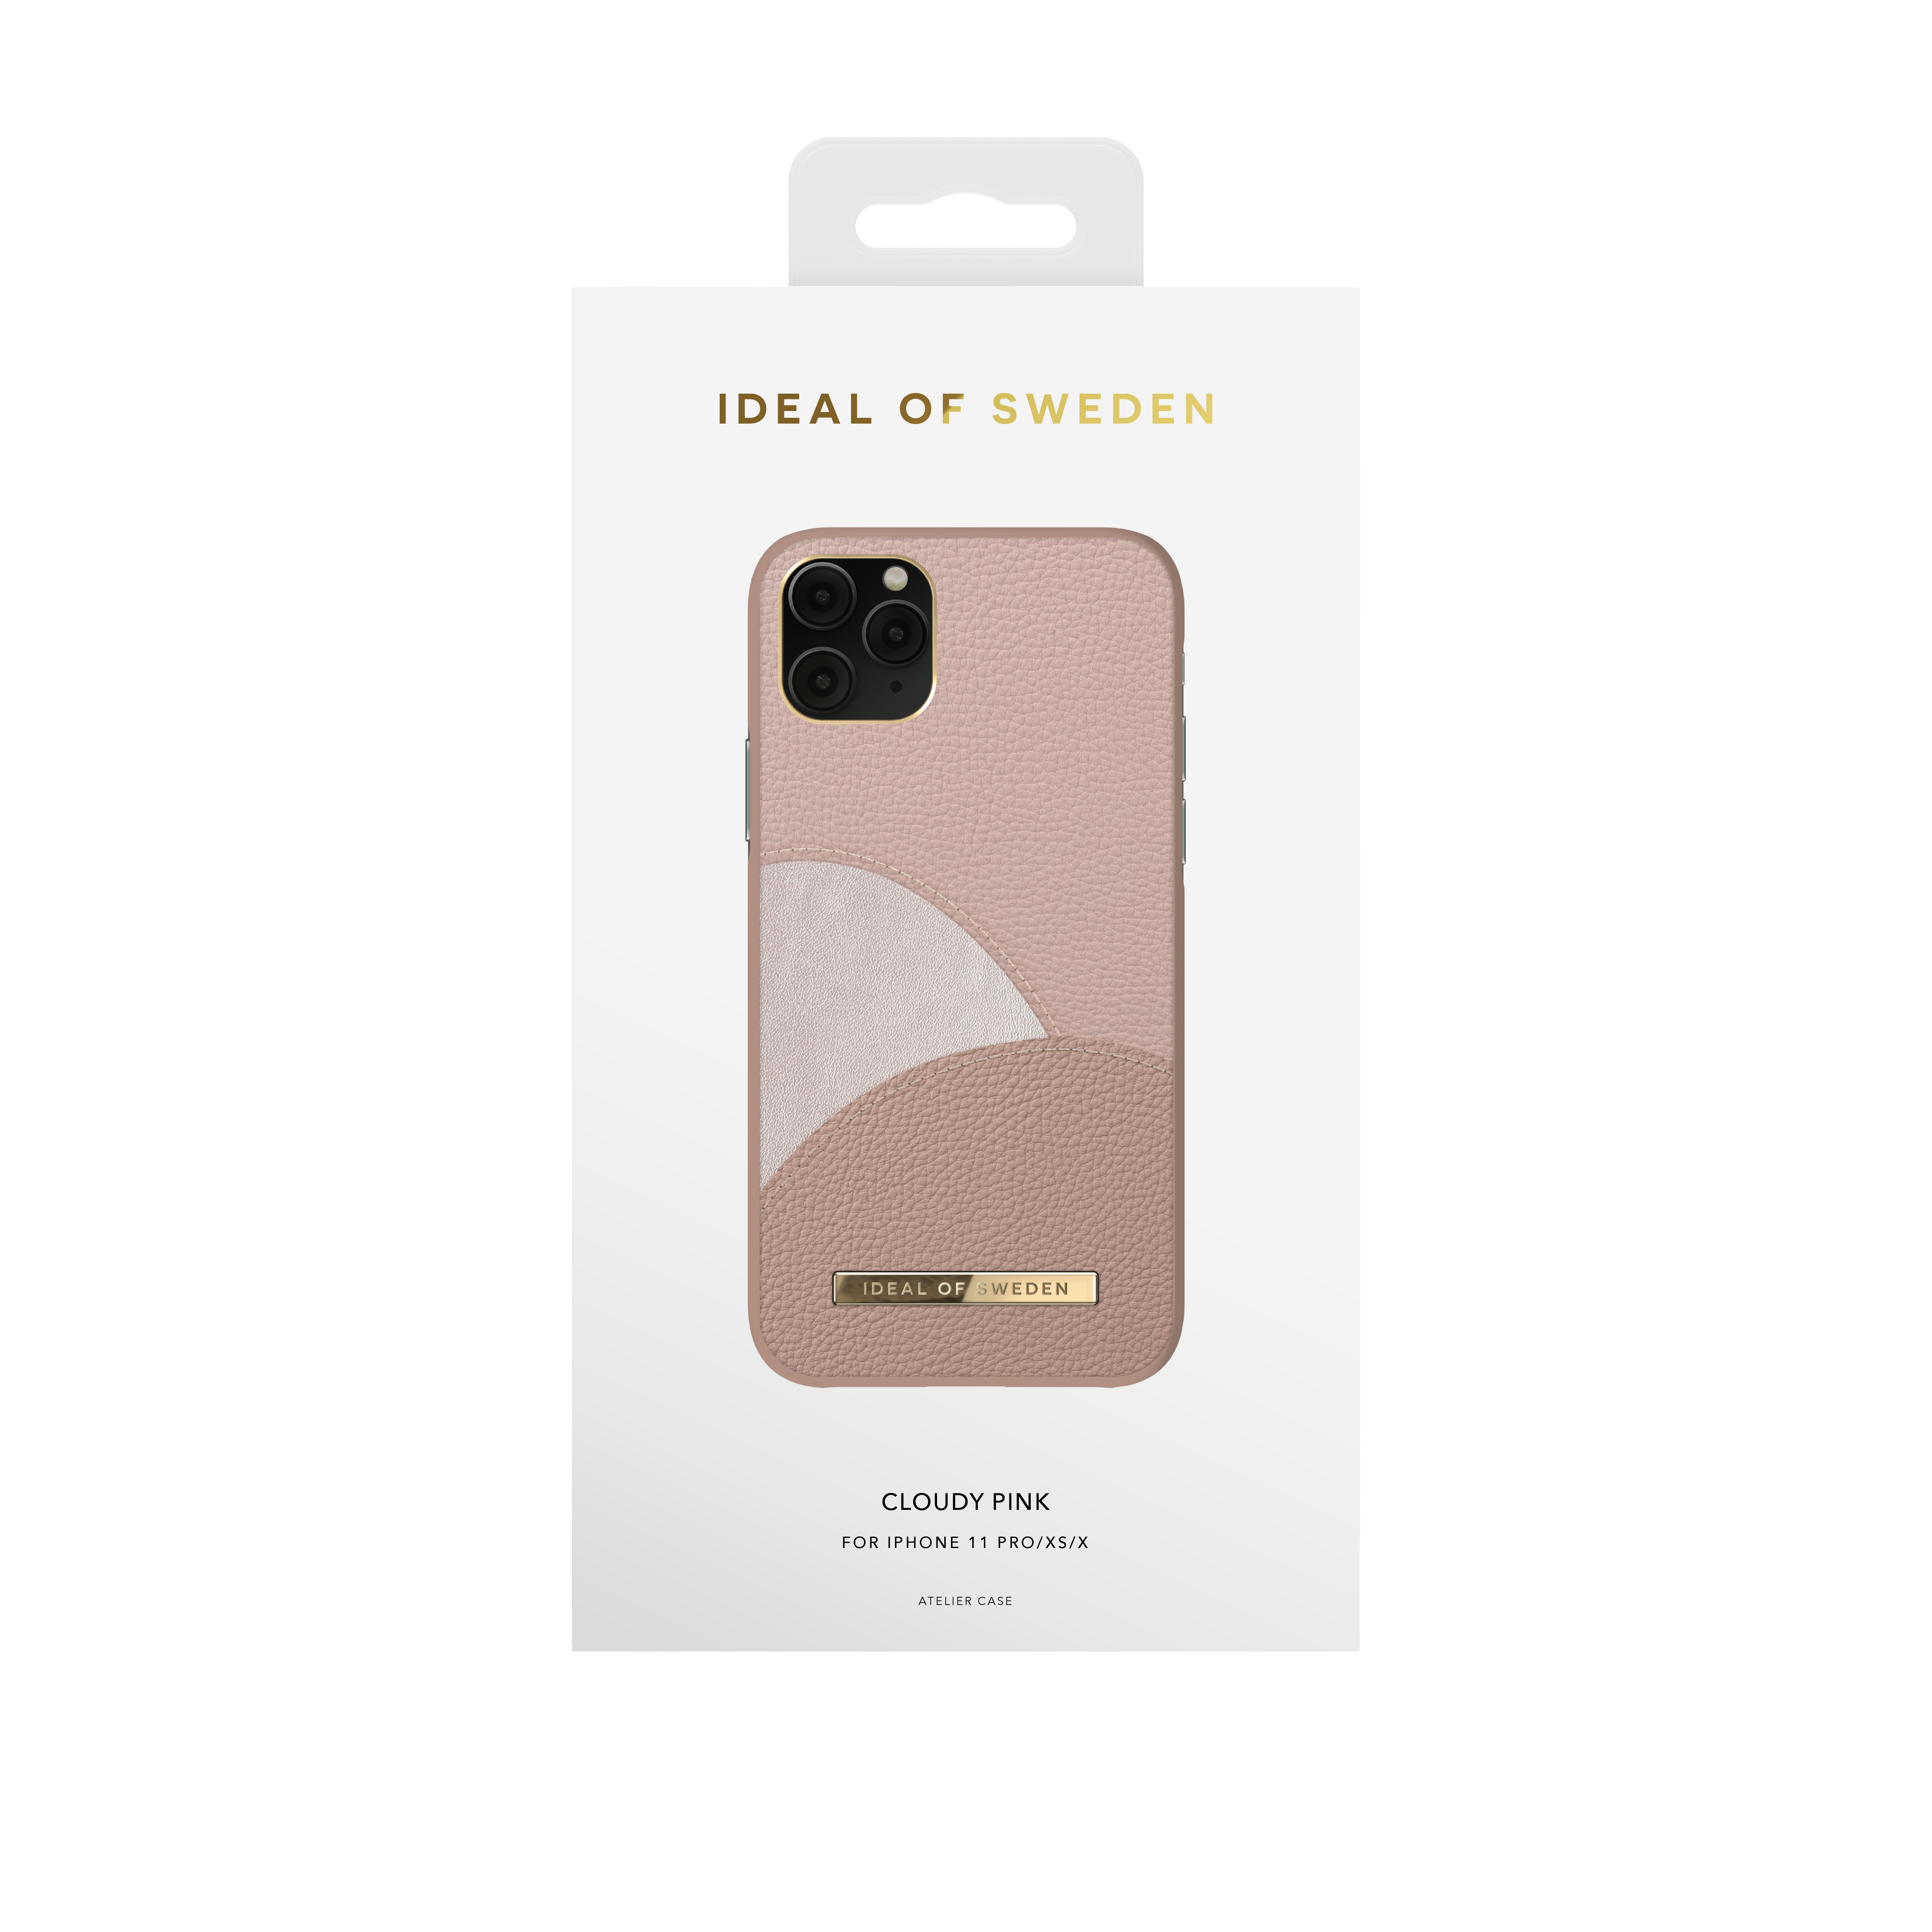 IDEAL OF SWEDEN IDACSS20-I1958-213, X, Pro, XS, iPhone Backcover, 11 Pink Apple, iPhone iPhone Cloudy